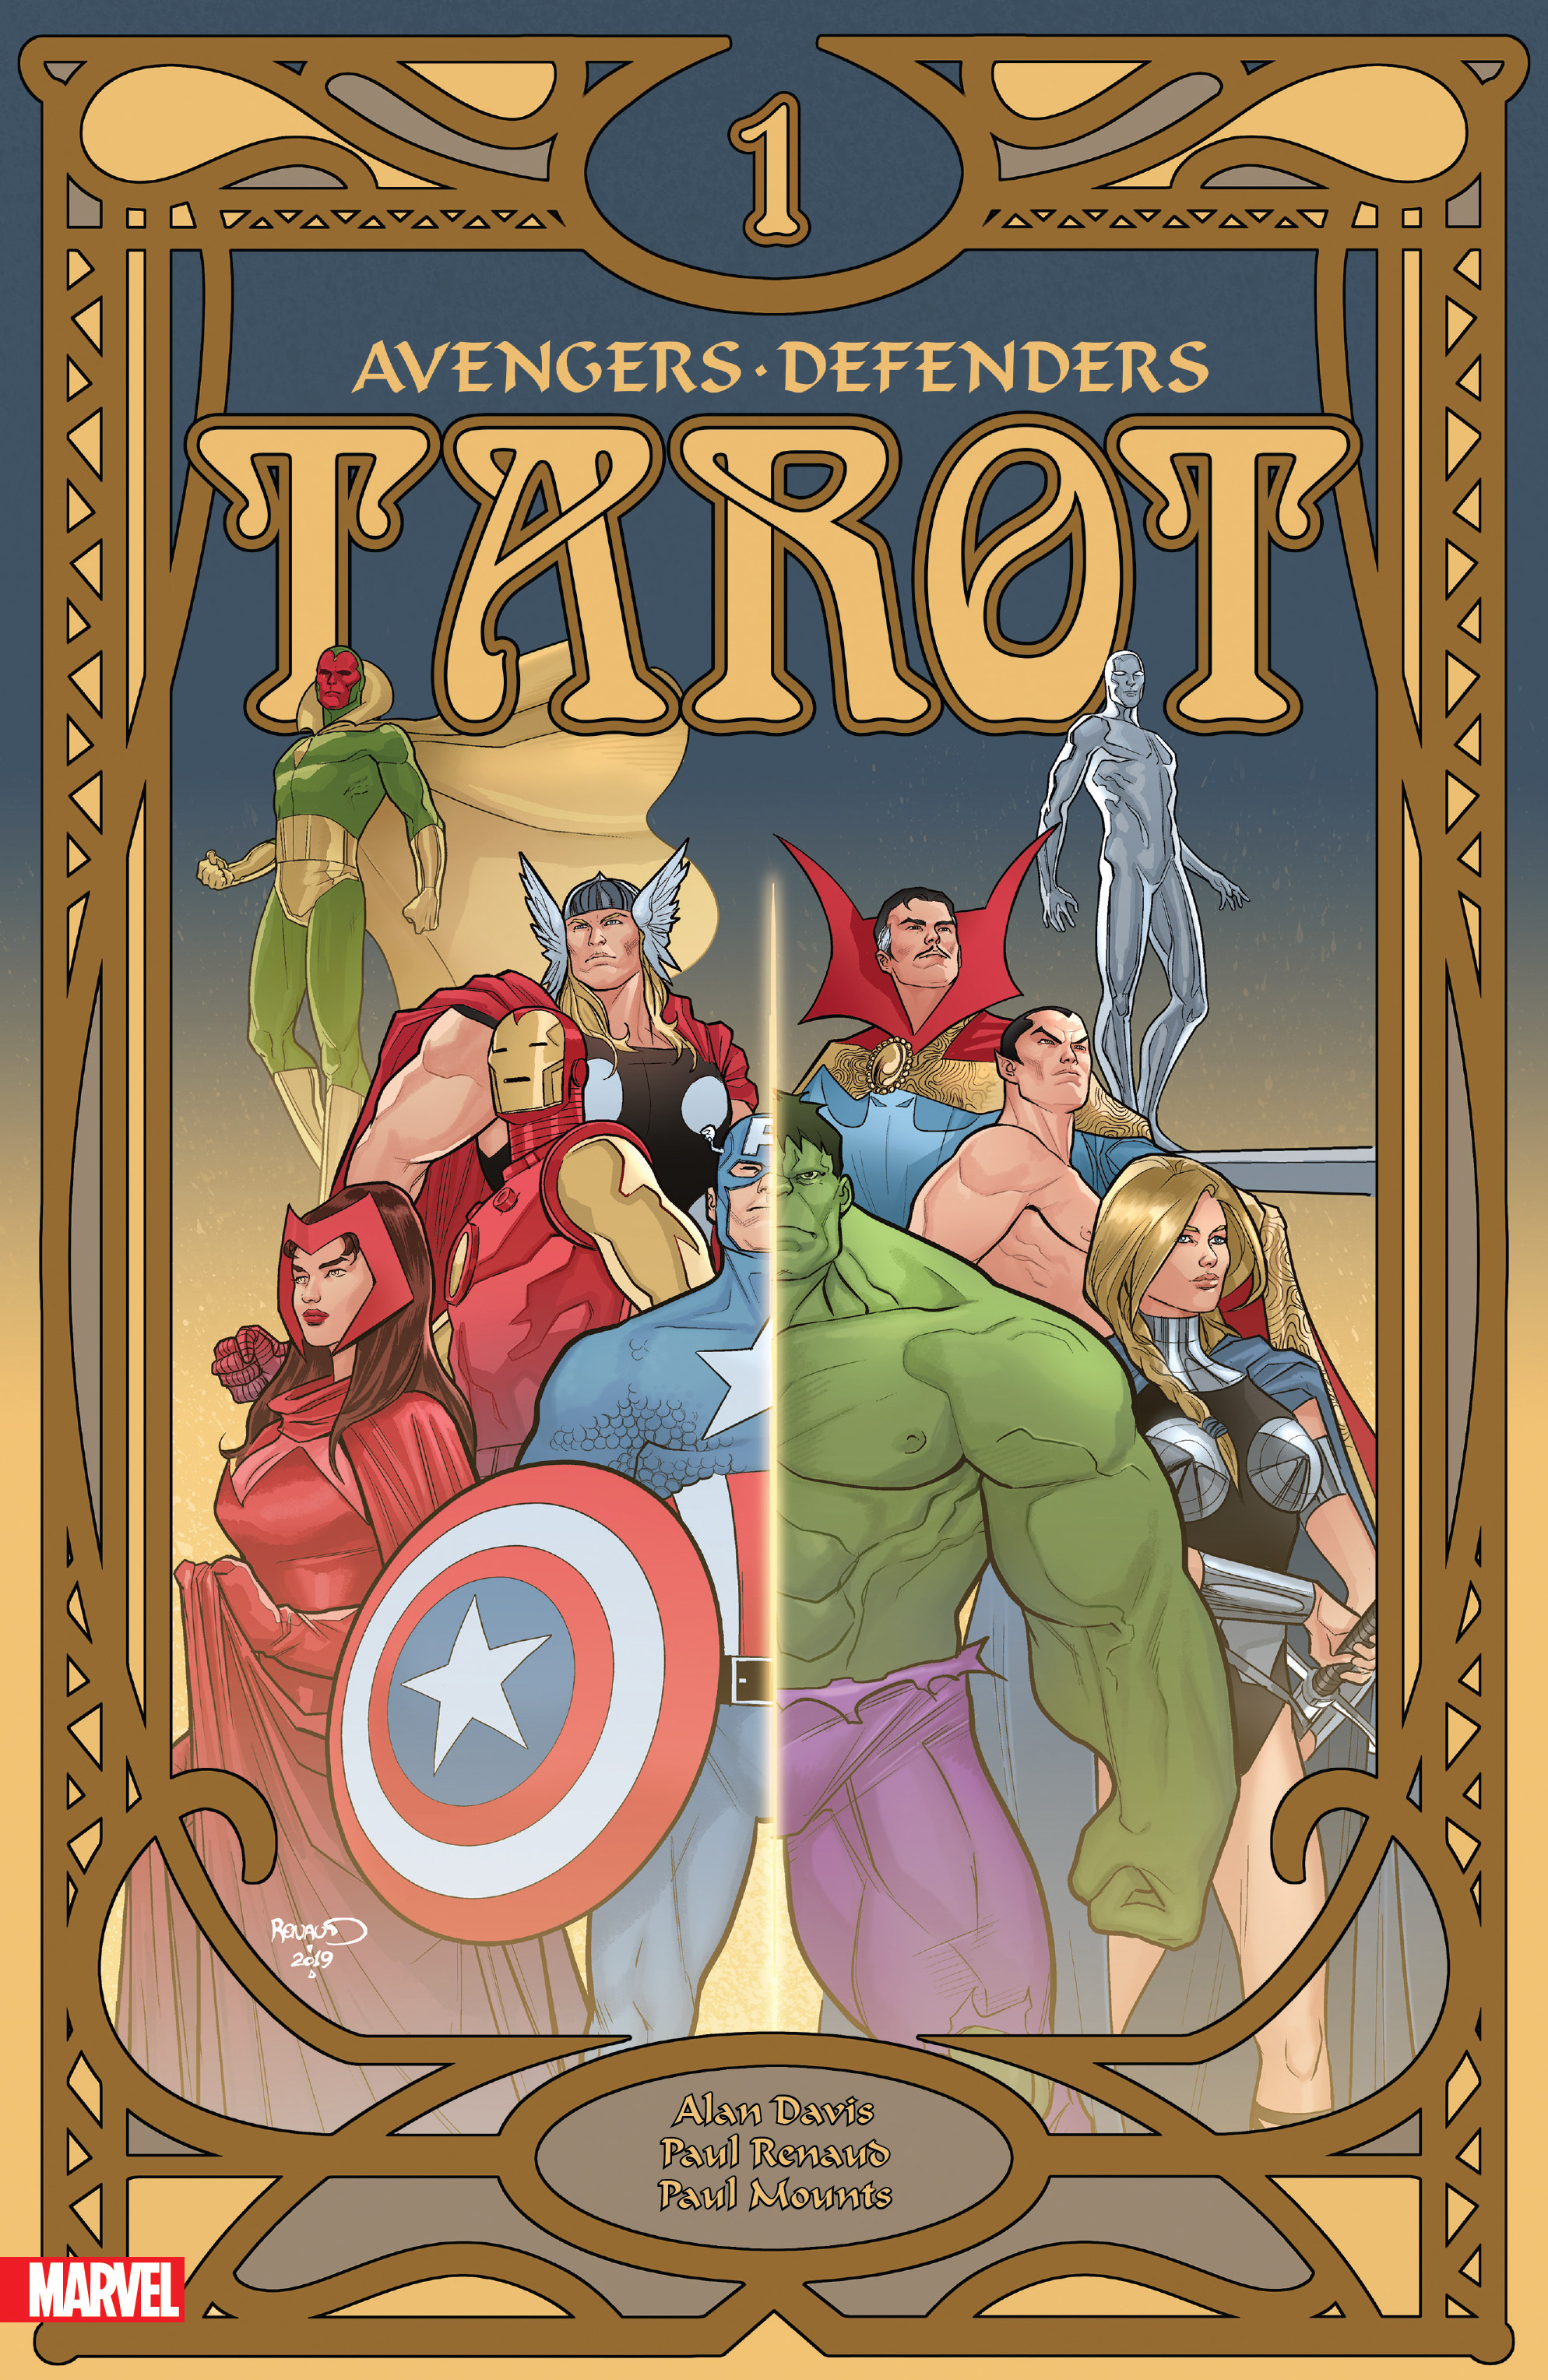 Tarot (2020): Chapter 1 - Page 1